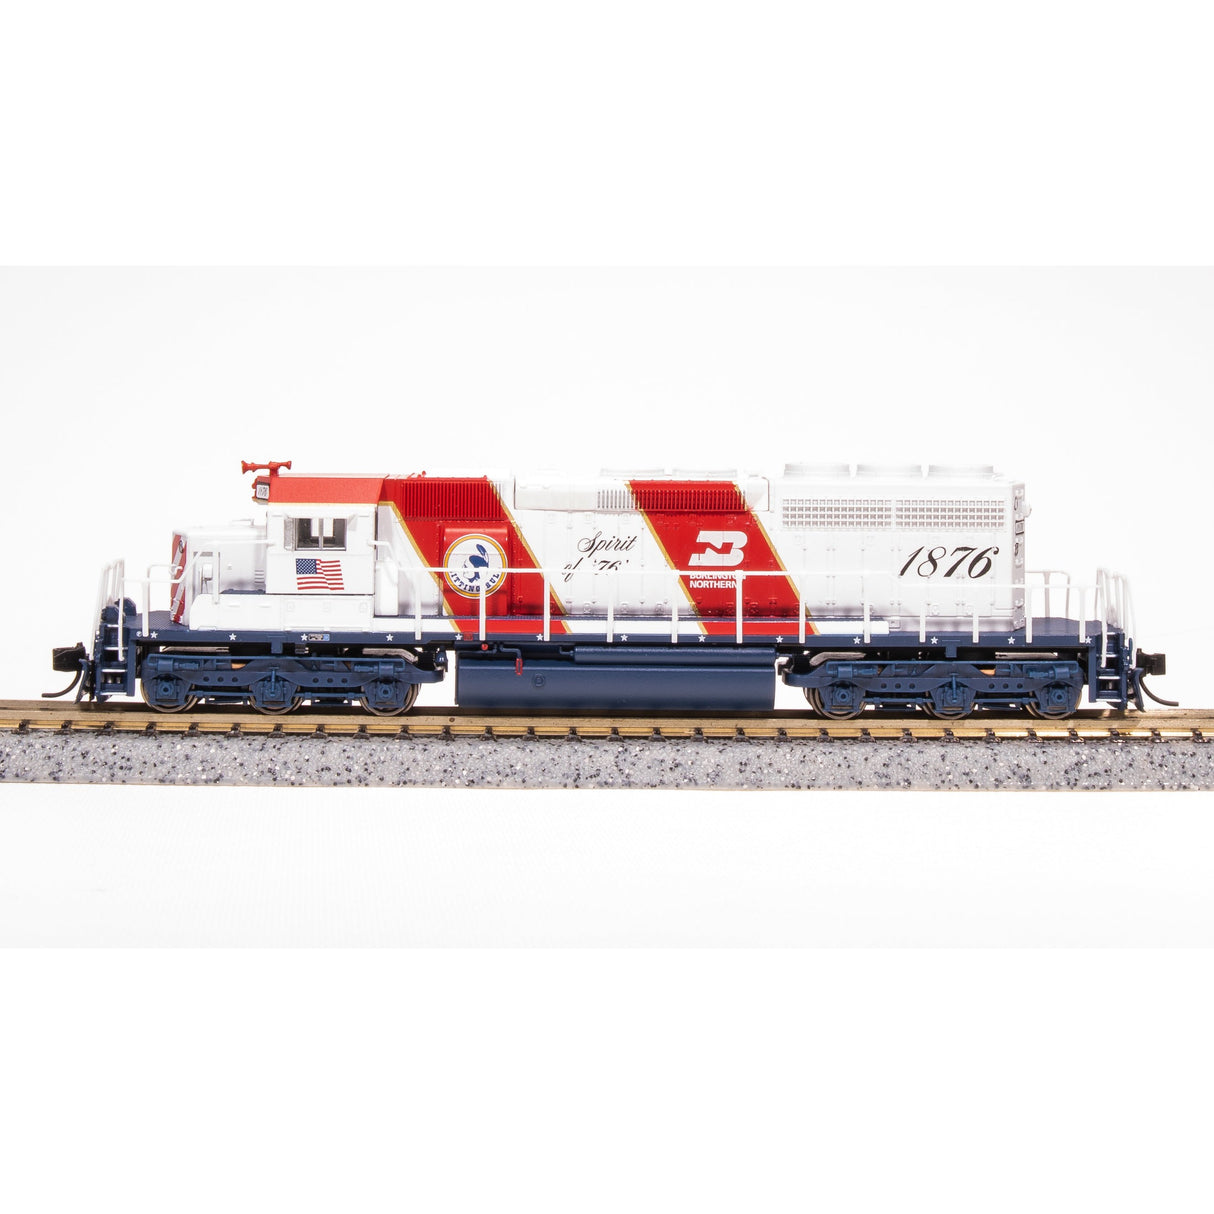 Broadway Limited N Scale SD40-2 Diesel BN #1876 Burlington Northern Spirit of '76 DCC Ready